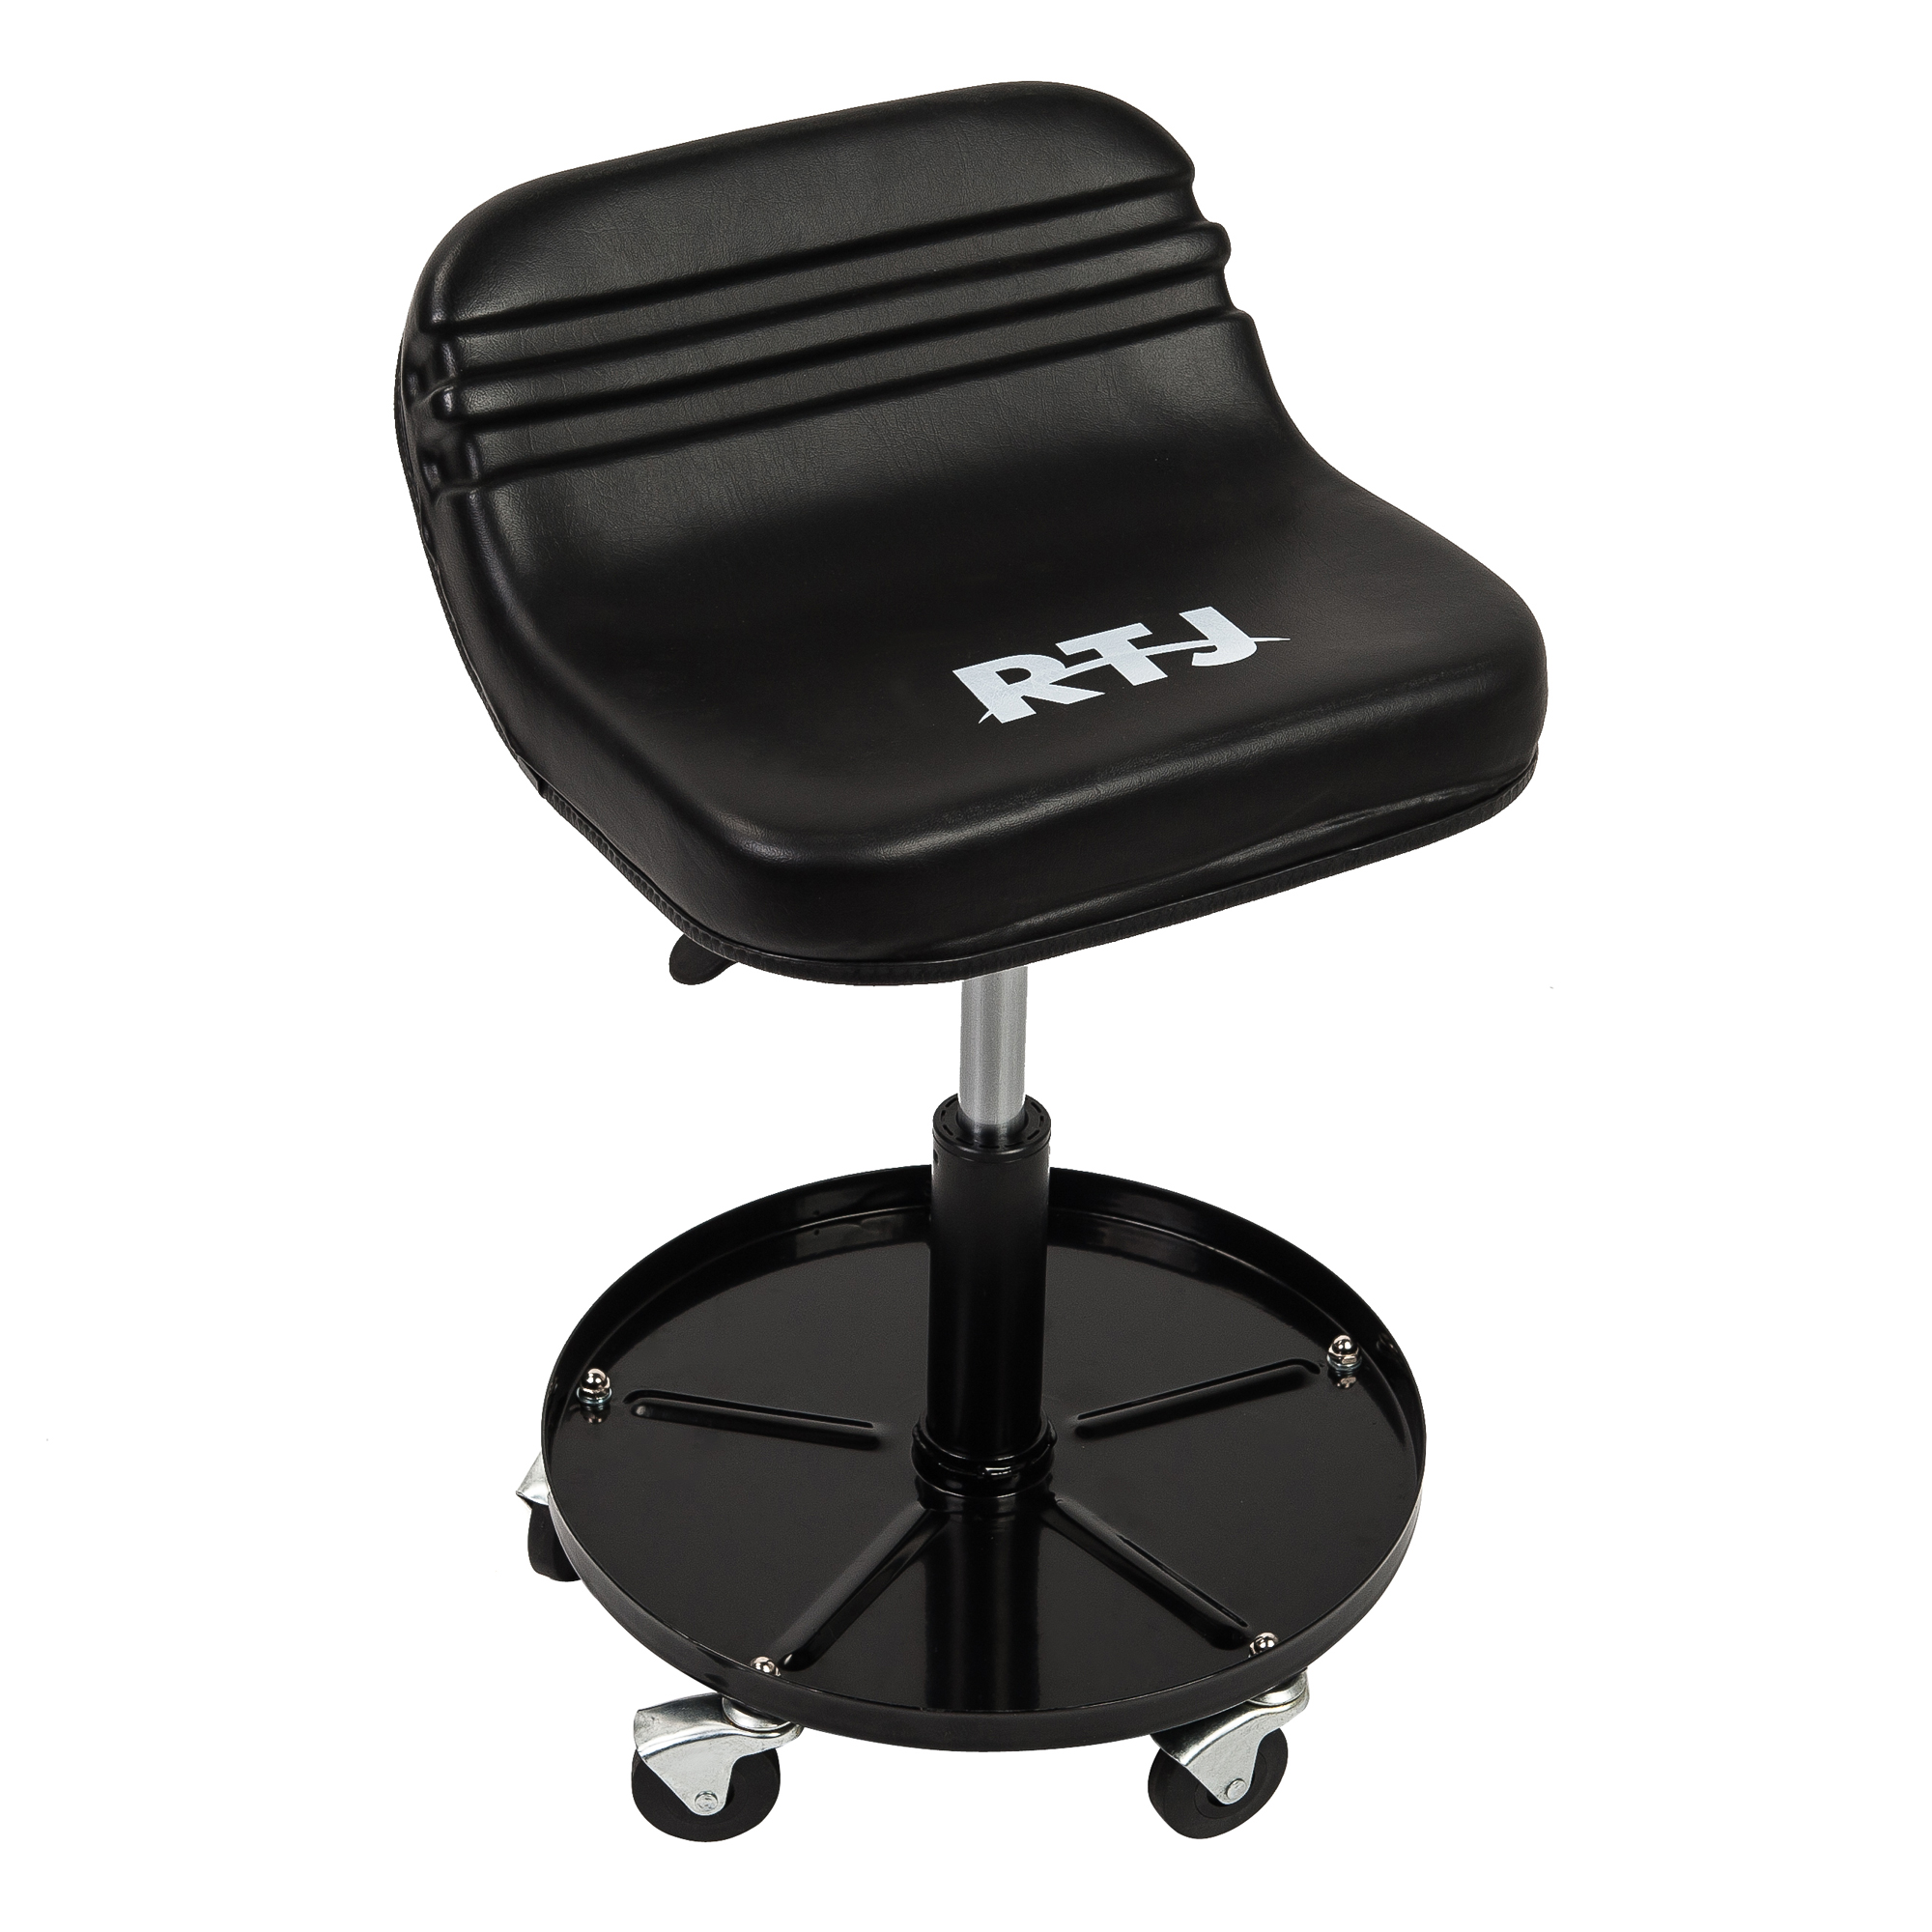 Adjustable Rolling Stool Black with 2.5-inch Heavy Duty Casters and Tool Tray ATRT 300-LB Capacity Pneumatic Mechanic Roller Seat 